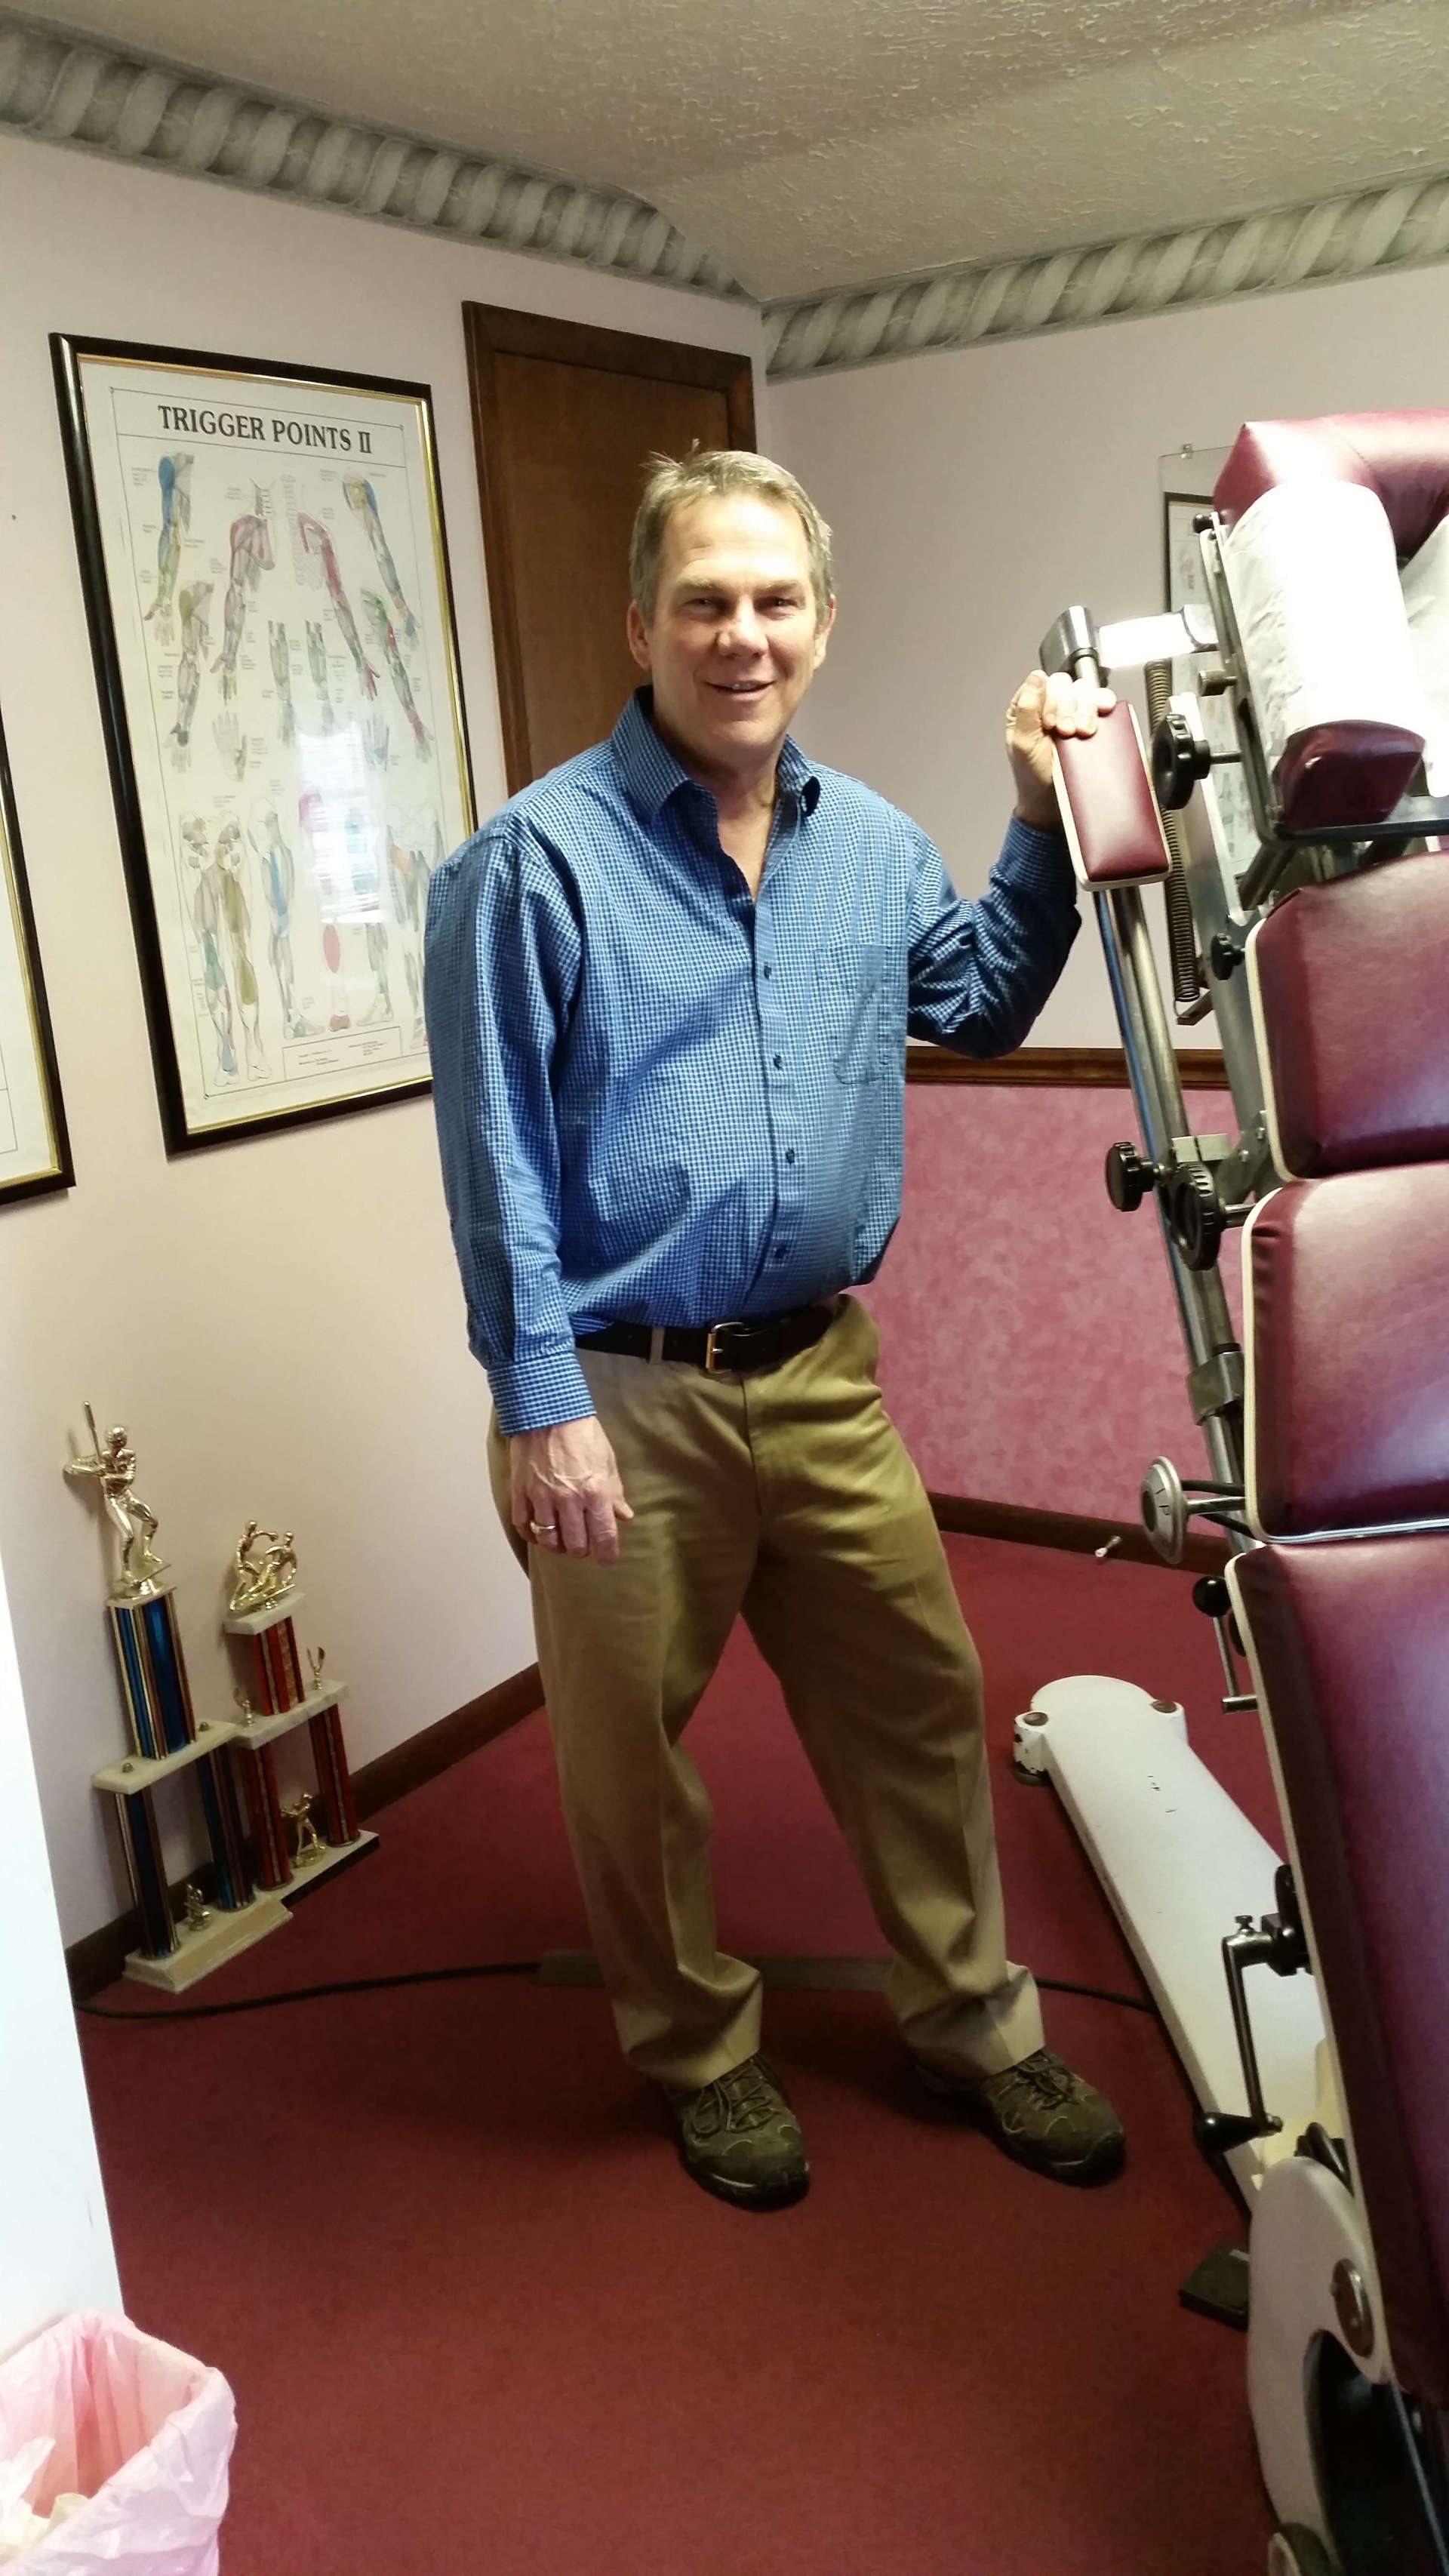 The Chiropractor - CHIROPRACTIC TREATMENT CENTER IN BELLEFONTAINE, OH